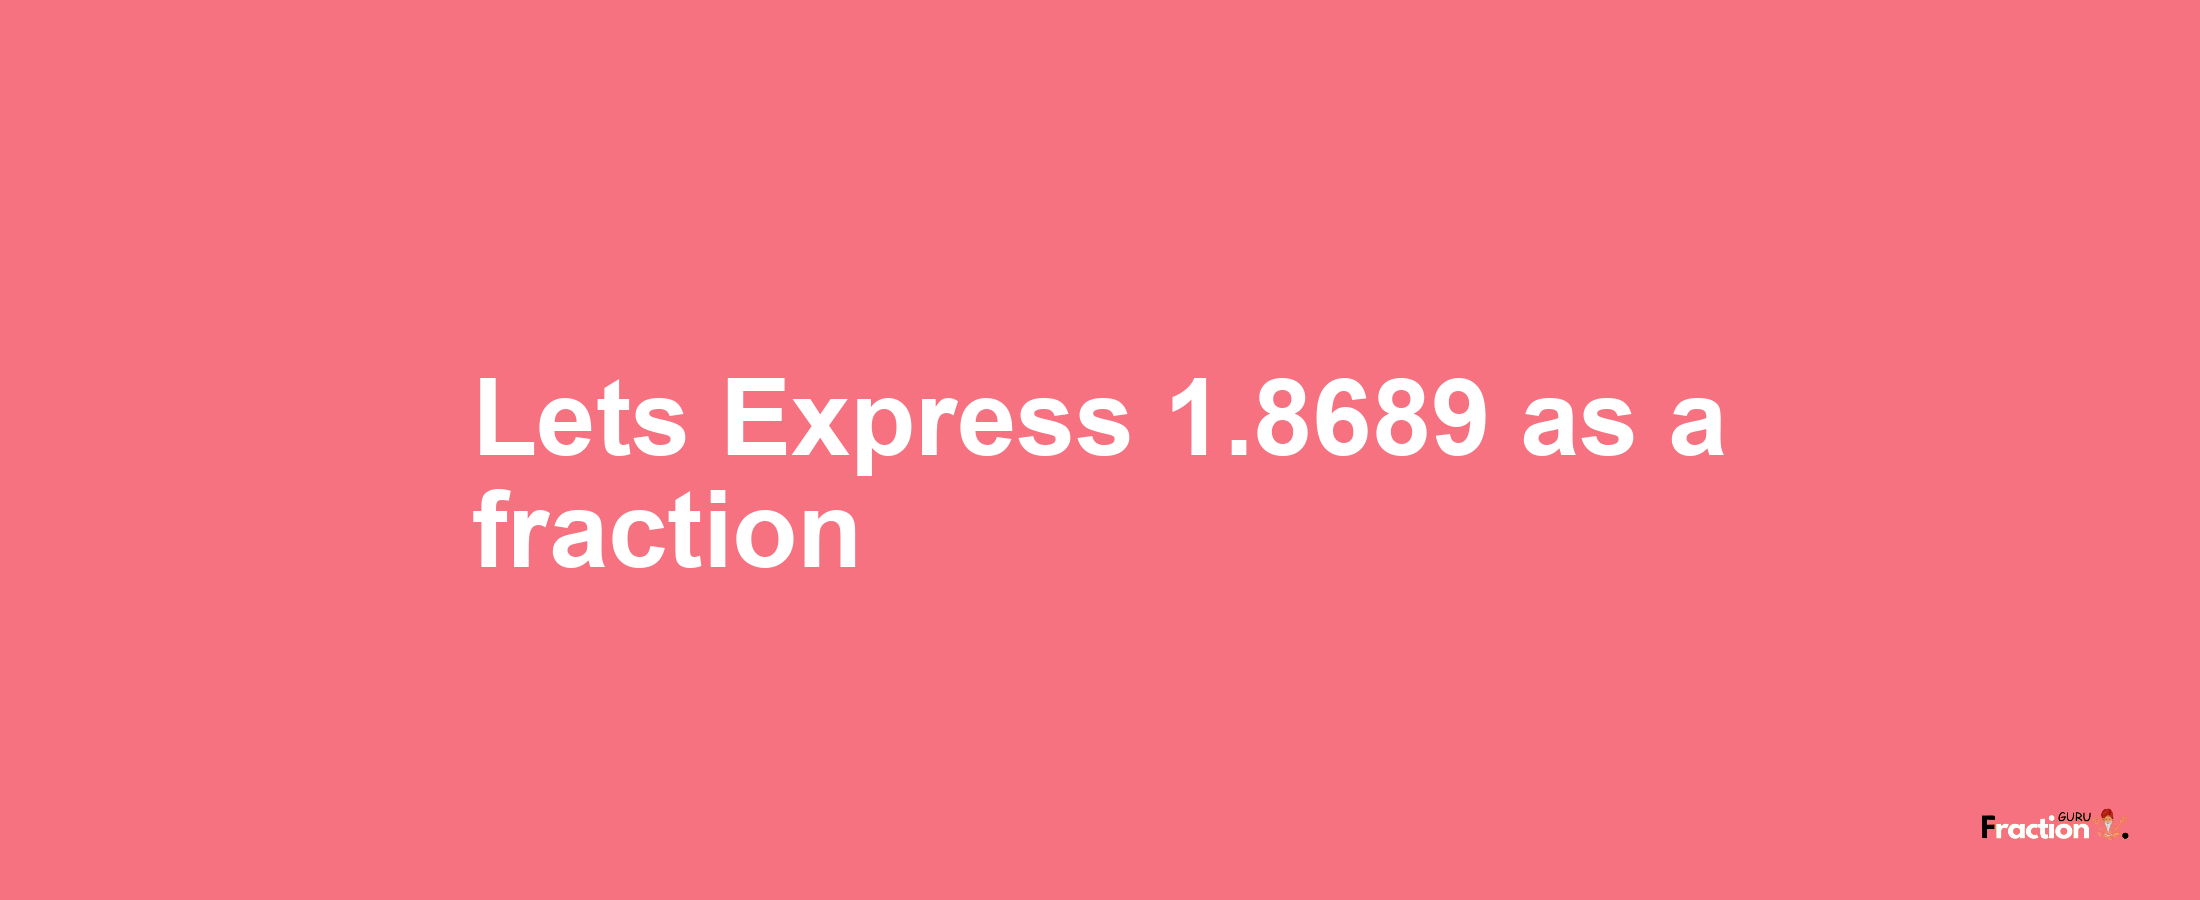 Lets Express 1.8689 as afraction